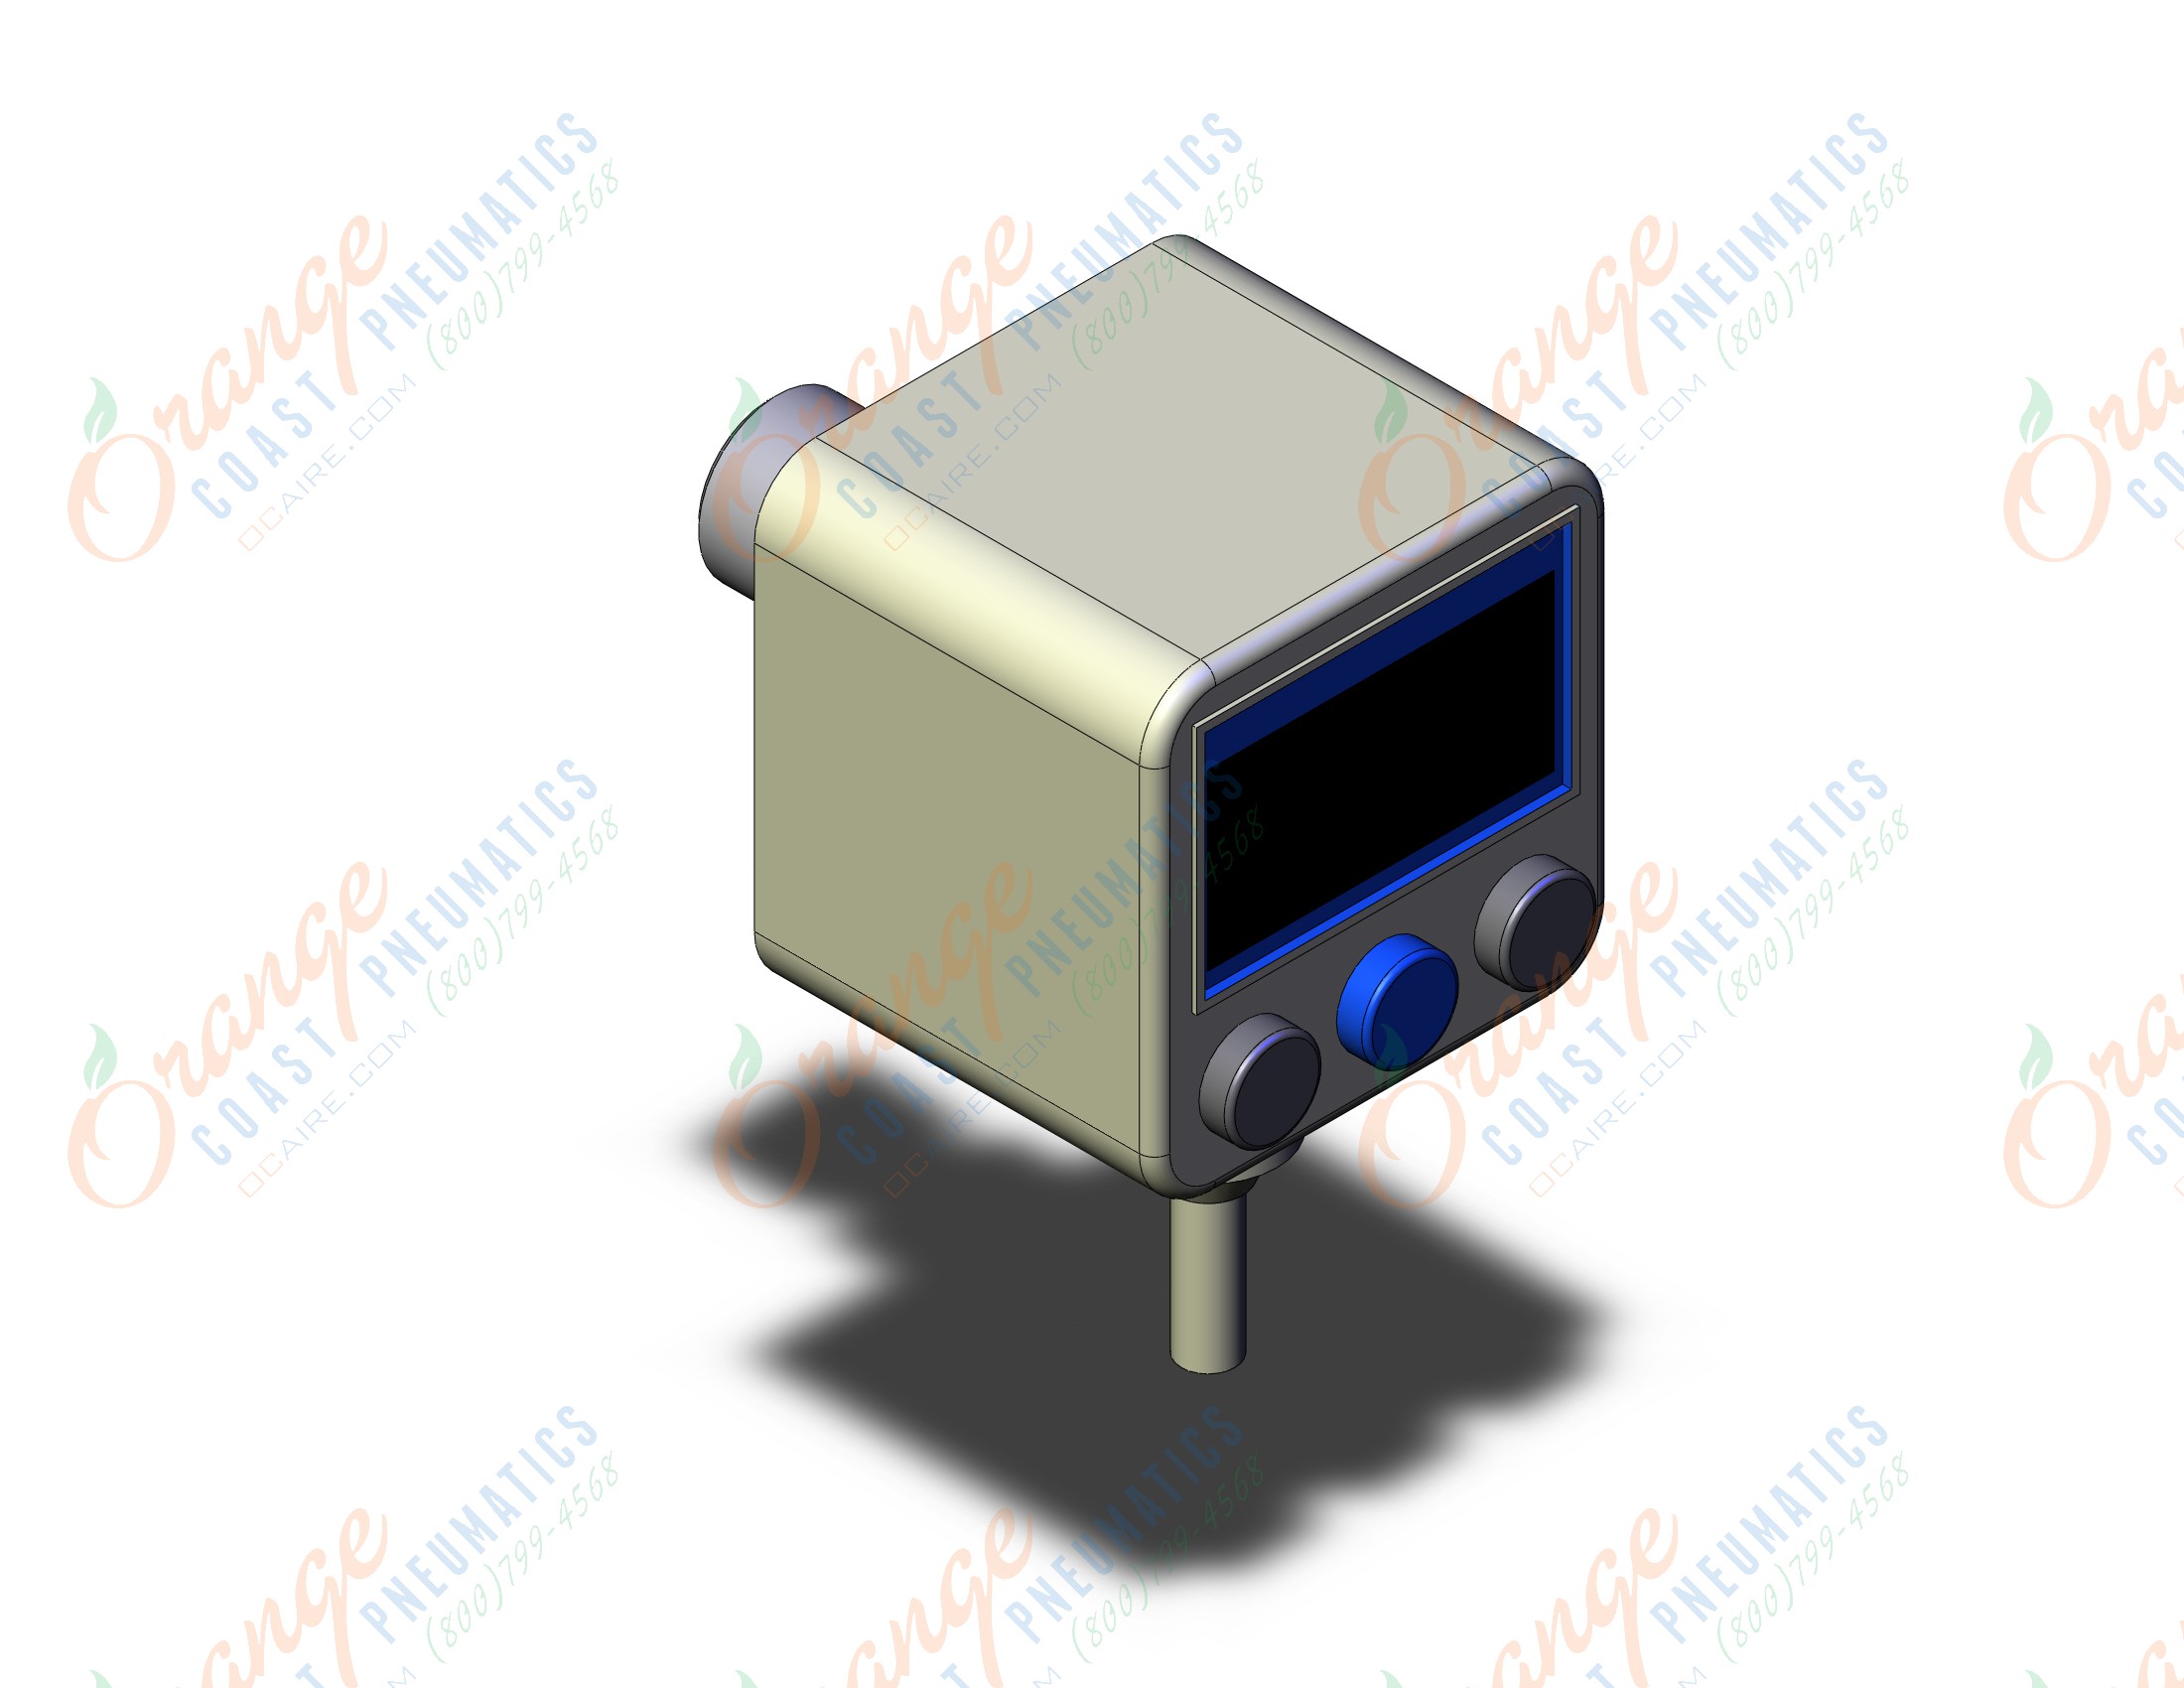 SMC ISE40A-01-T-K ise40/50/60 1/8" pt version, ISE40/50/60 PRESSURE SWITCH